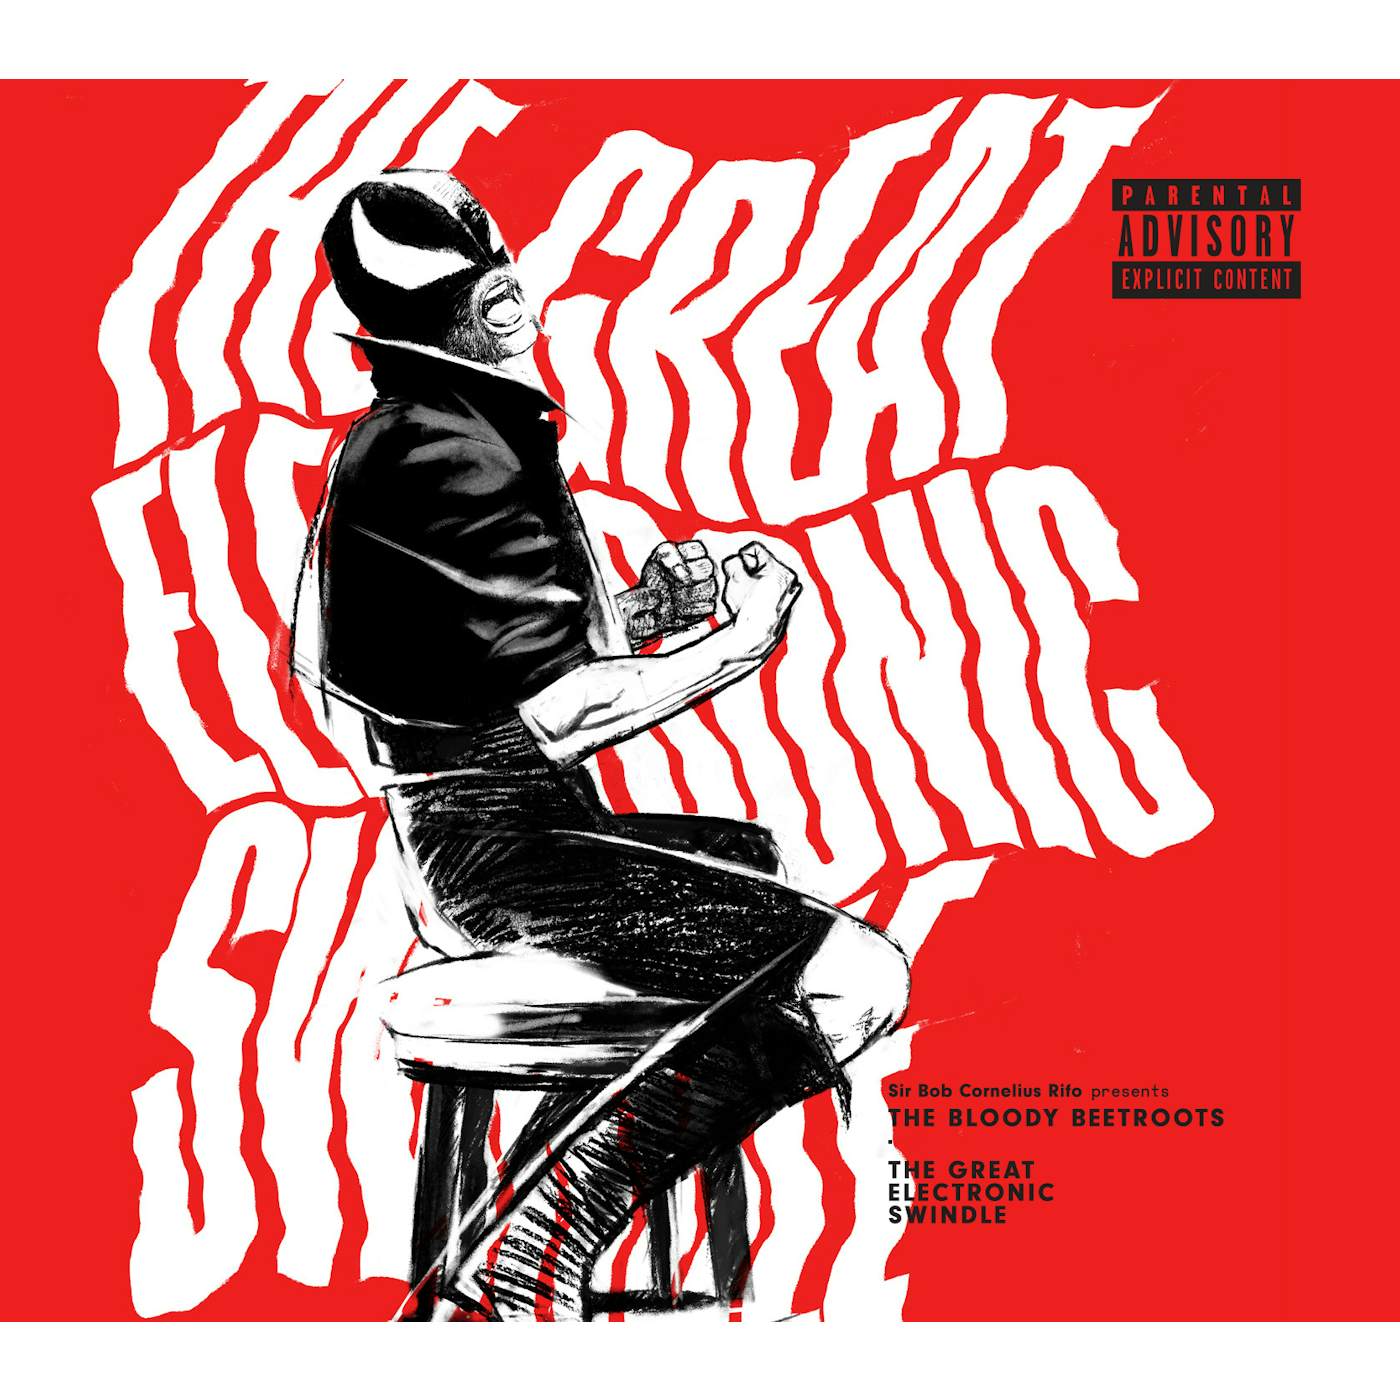 The Bloody Beetroots GREAT ELECTRONIC SWINDLE Vinyl Record